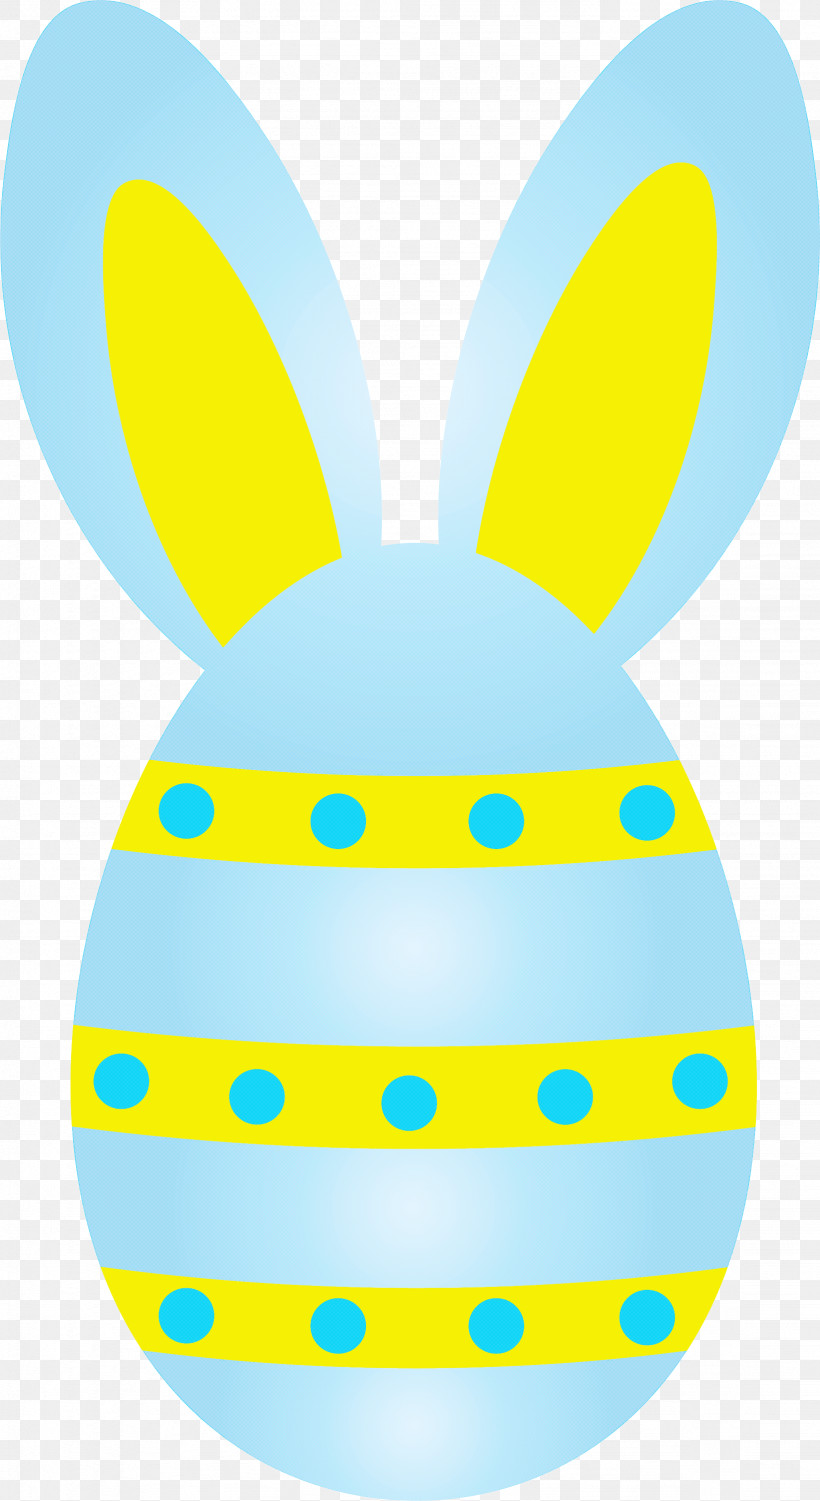 Easter Egg With Bunny Ears, PNG, 1638x3000px, Easter Egg With Bunny Ears, Easter Bunny, Easter Egg, Rabbit, Turquoise Download Free